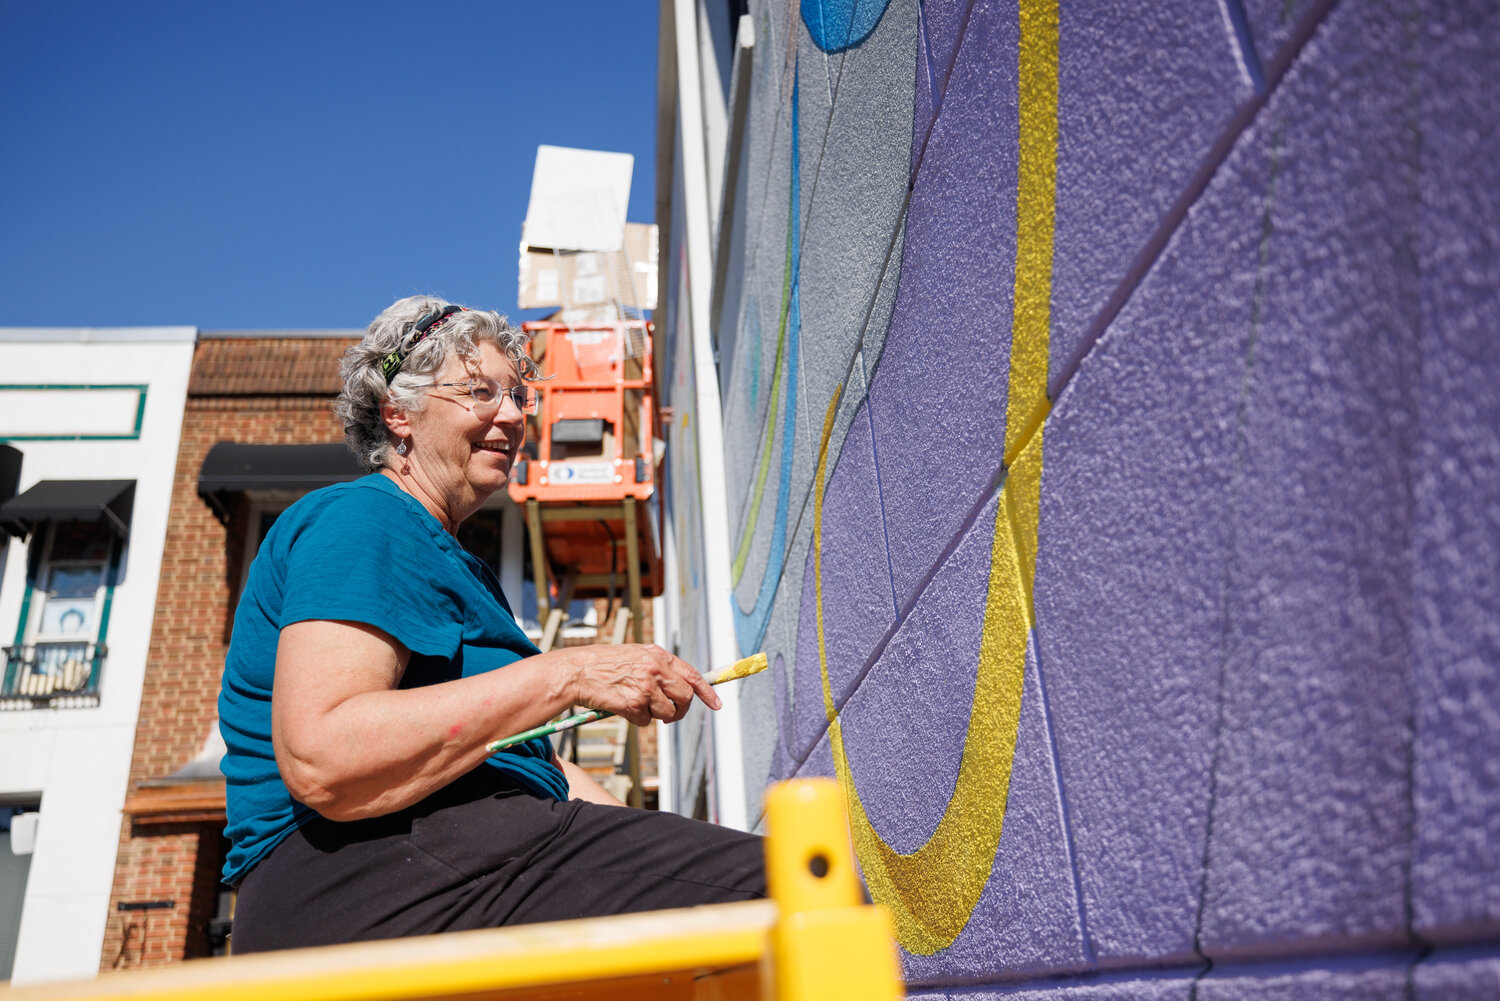 Patsy painted the yellow ribbon emerging from "Lady Muriel's" dress. “We’ve loved seeing the new murals around town, and we wanted to be part of that,” Patsy said about her hopes for the mural.